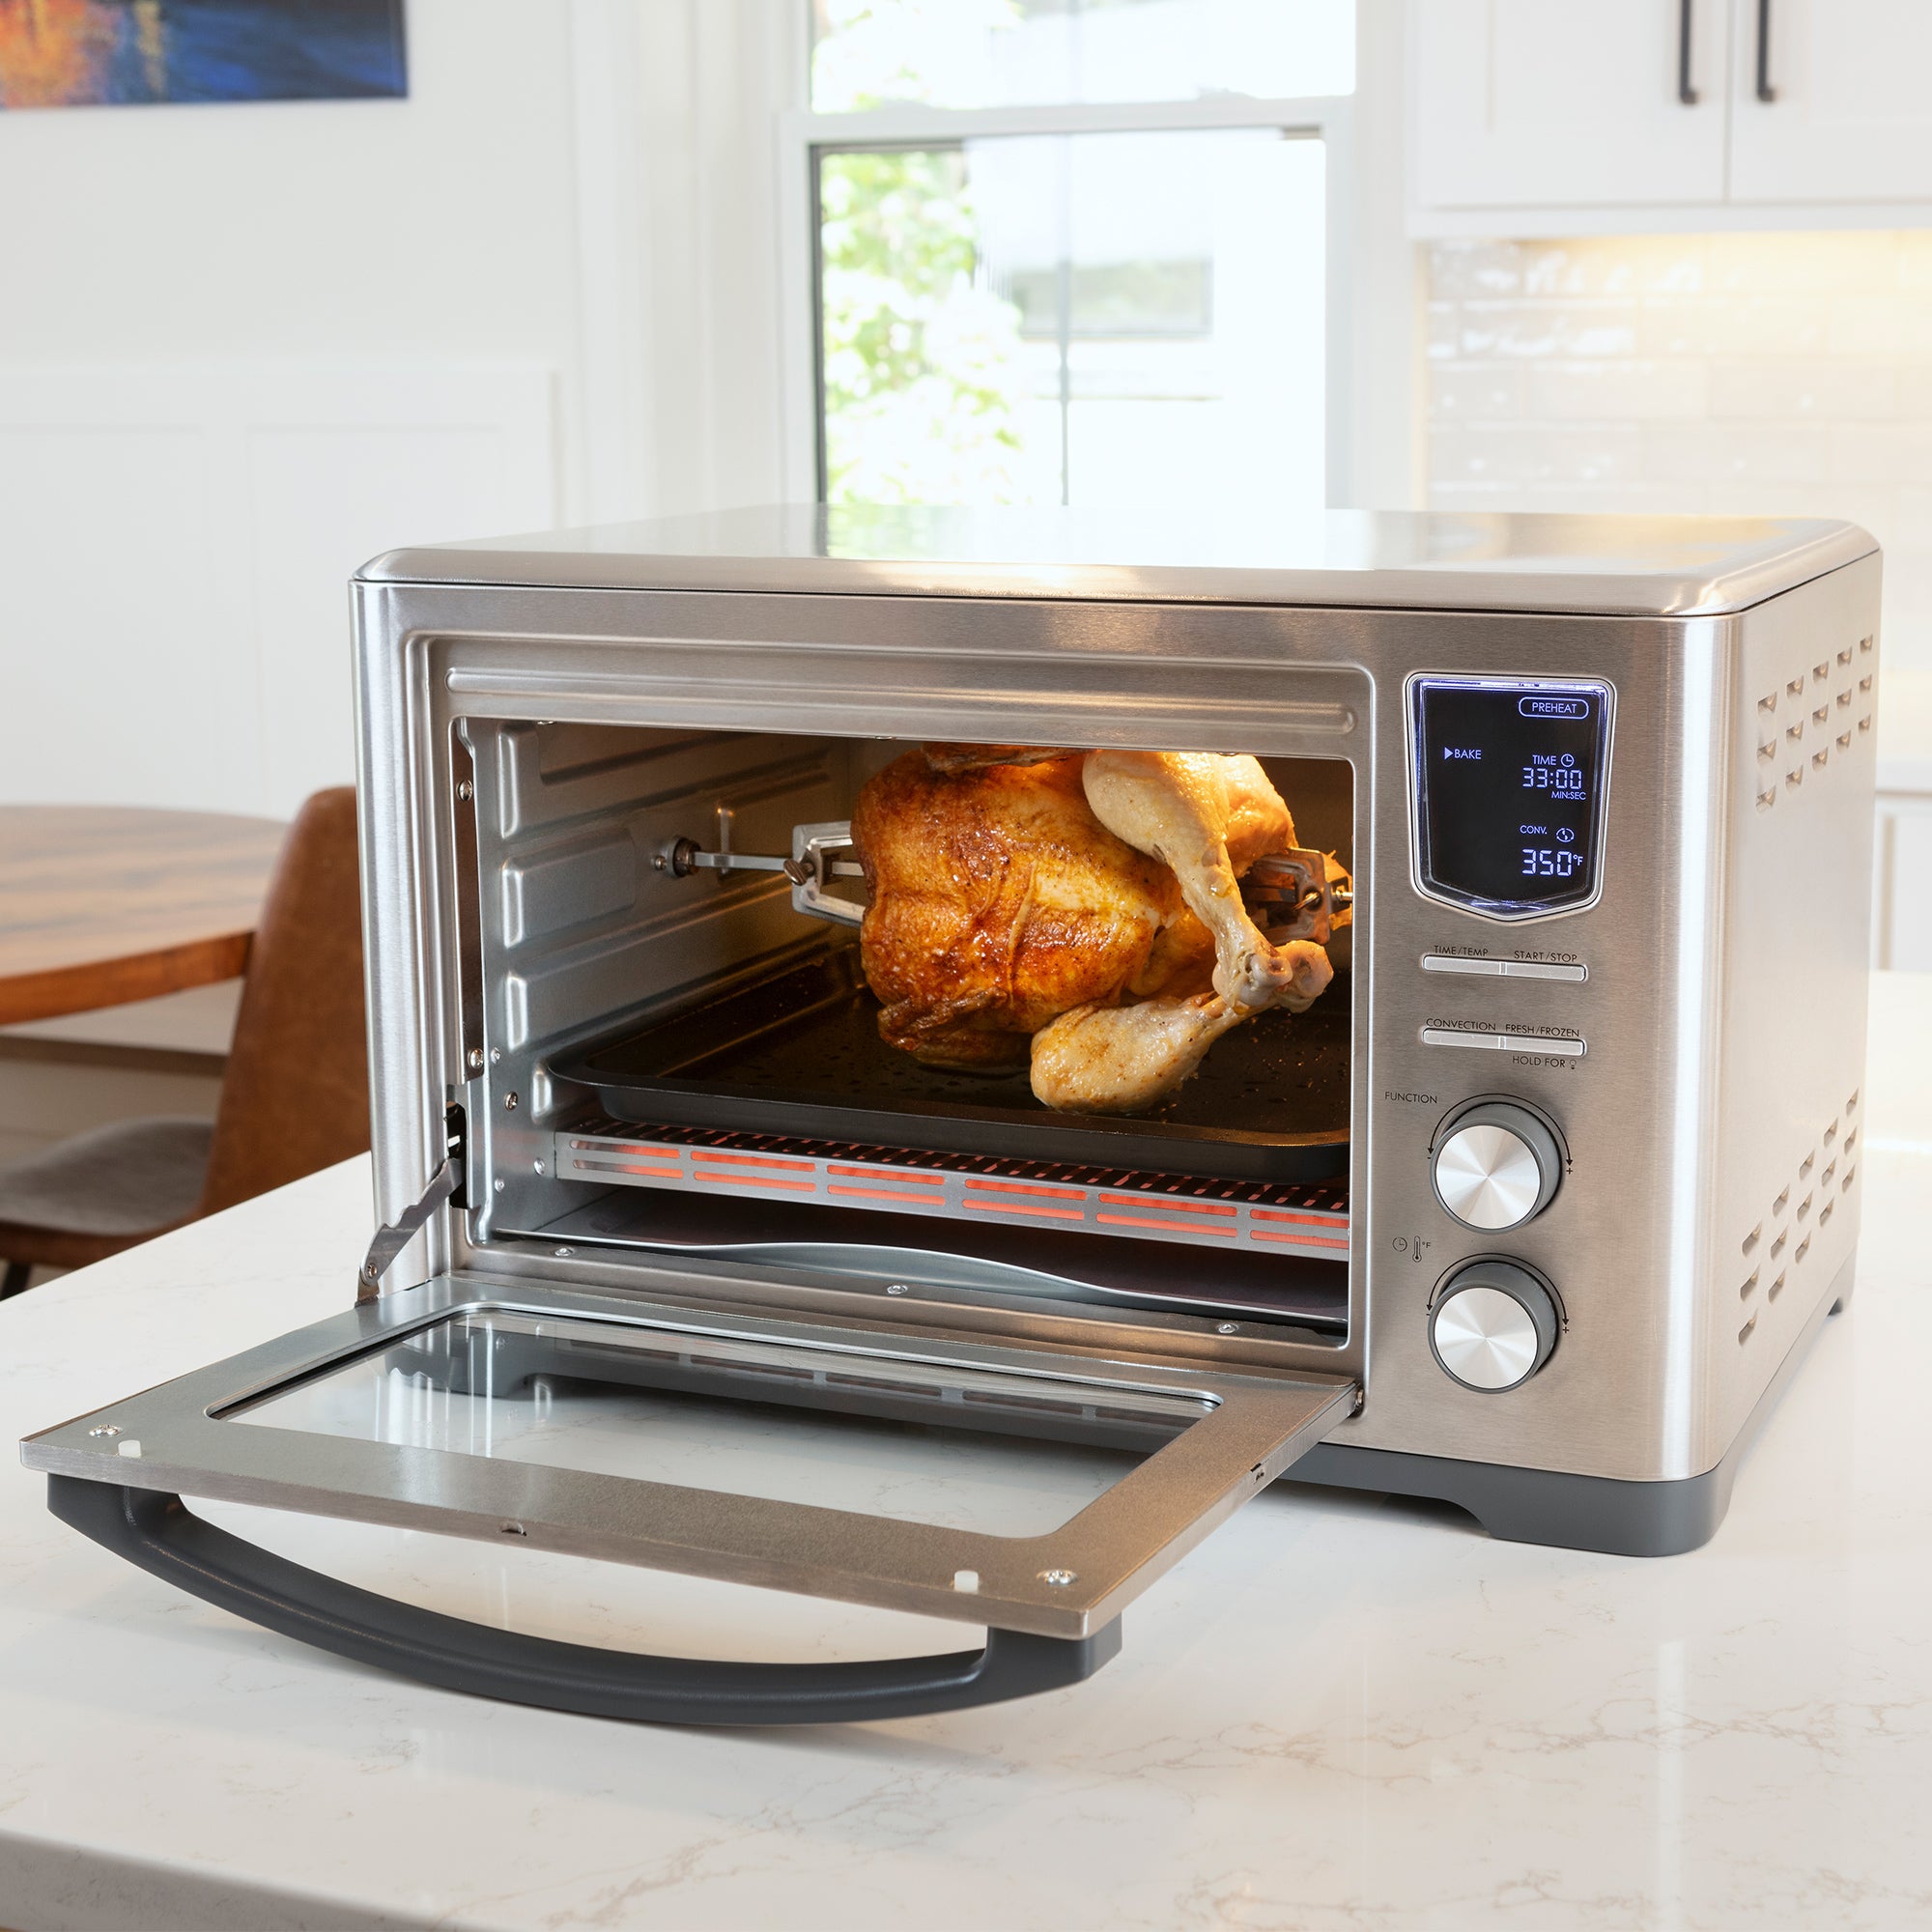 Kenmore 24 liter 11-in-1 toaster oven/air fryer/dehydrator with convection fan, open with a whole chicken on the rotisserie, on a white marble kitchen counter